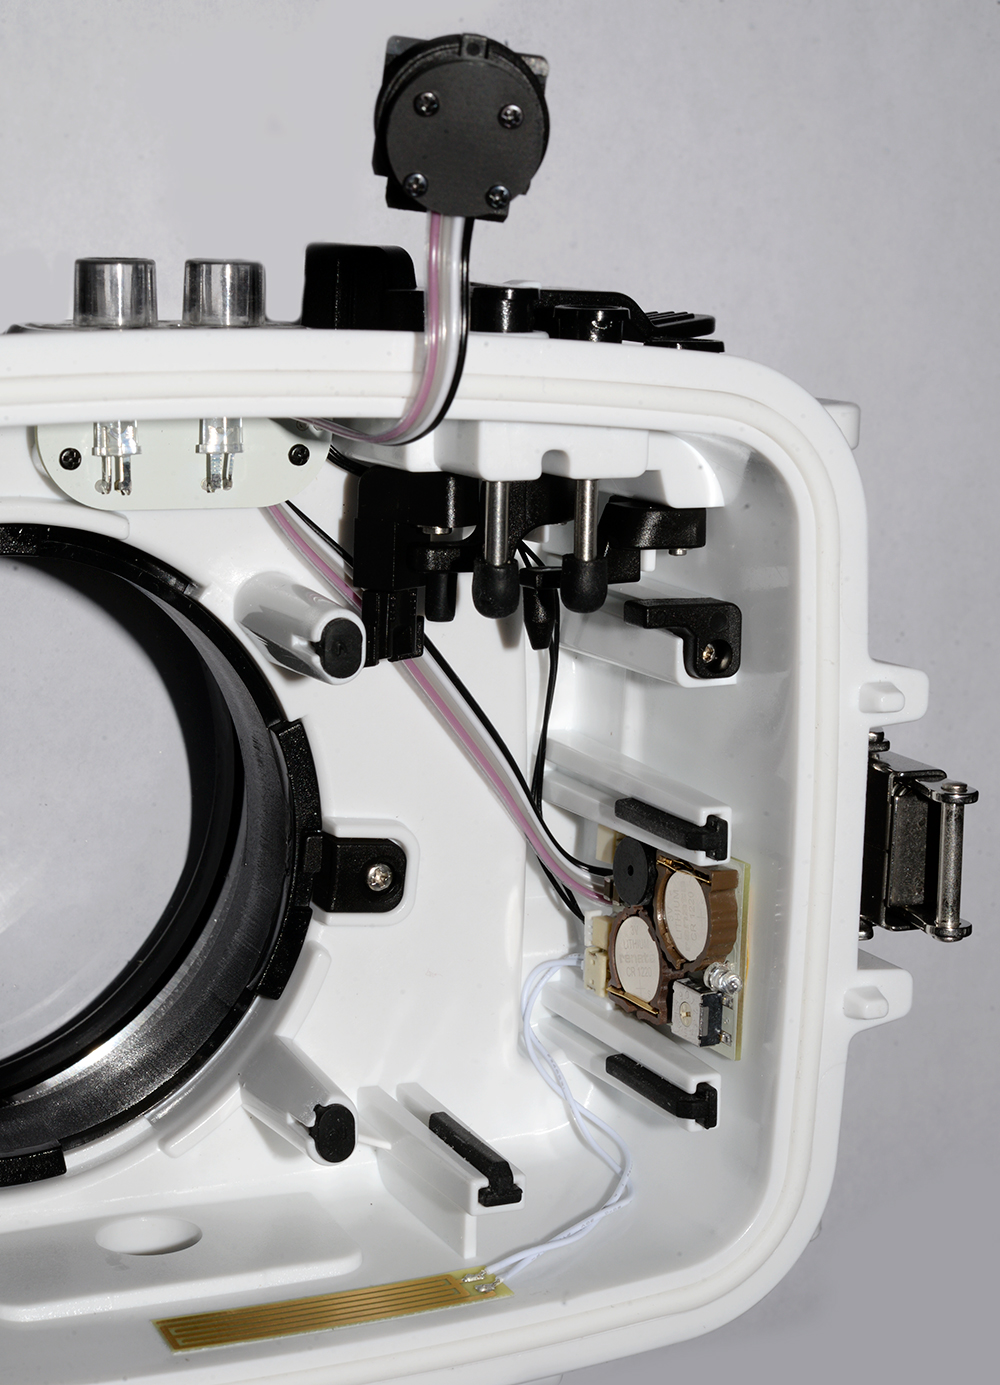 TTL-Converter for Sony A6xxx for SEAFROGS (MEIKON) housing